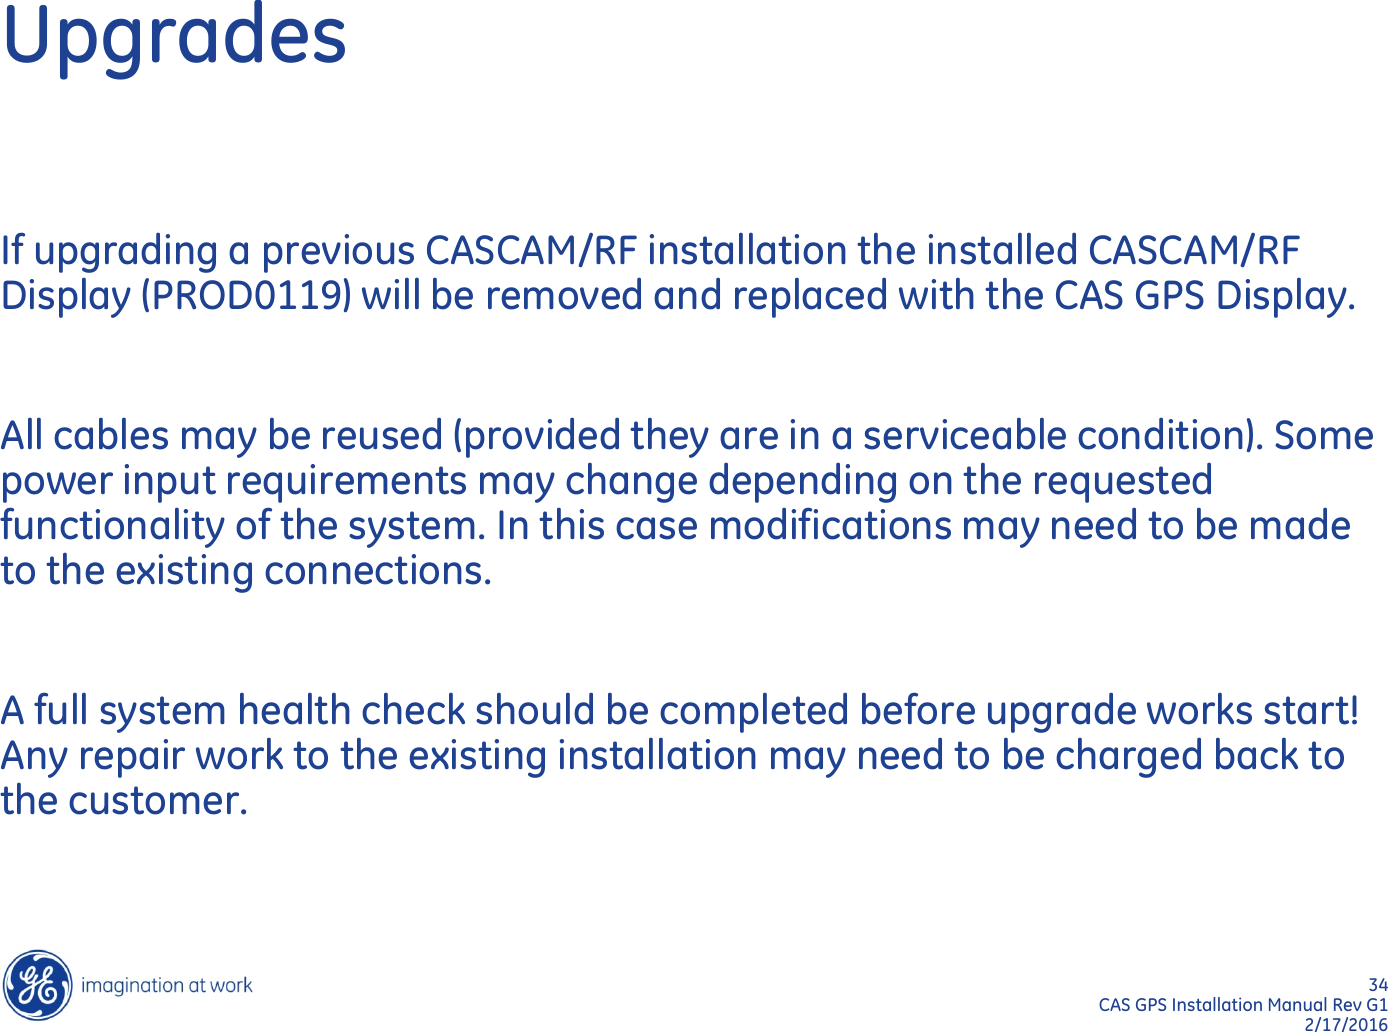 34  CAS GPS Installation Manual Rev G1 2/17/2016 Upgrades If upgrading a previous CASCAM/RF installation the installed CASCAM/RF Display (PROD0119) will be removed and replaced with the CAS GPS Display.  All cables may be reused (provided they are in a serviceable condition). Some power input requirements may change depending on the requested functionality of the system. In this case modifications may need to be made to the existing connections.  A full system health check should be completed before upgrade works start! Any repair work to the existing installation may need to be charged back to the customer. 